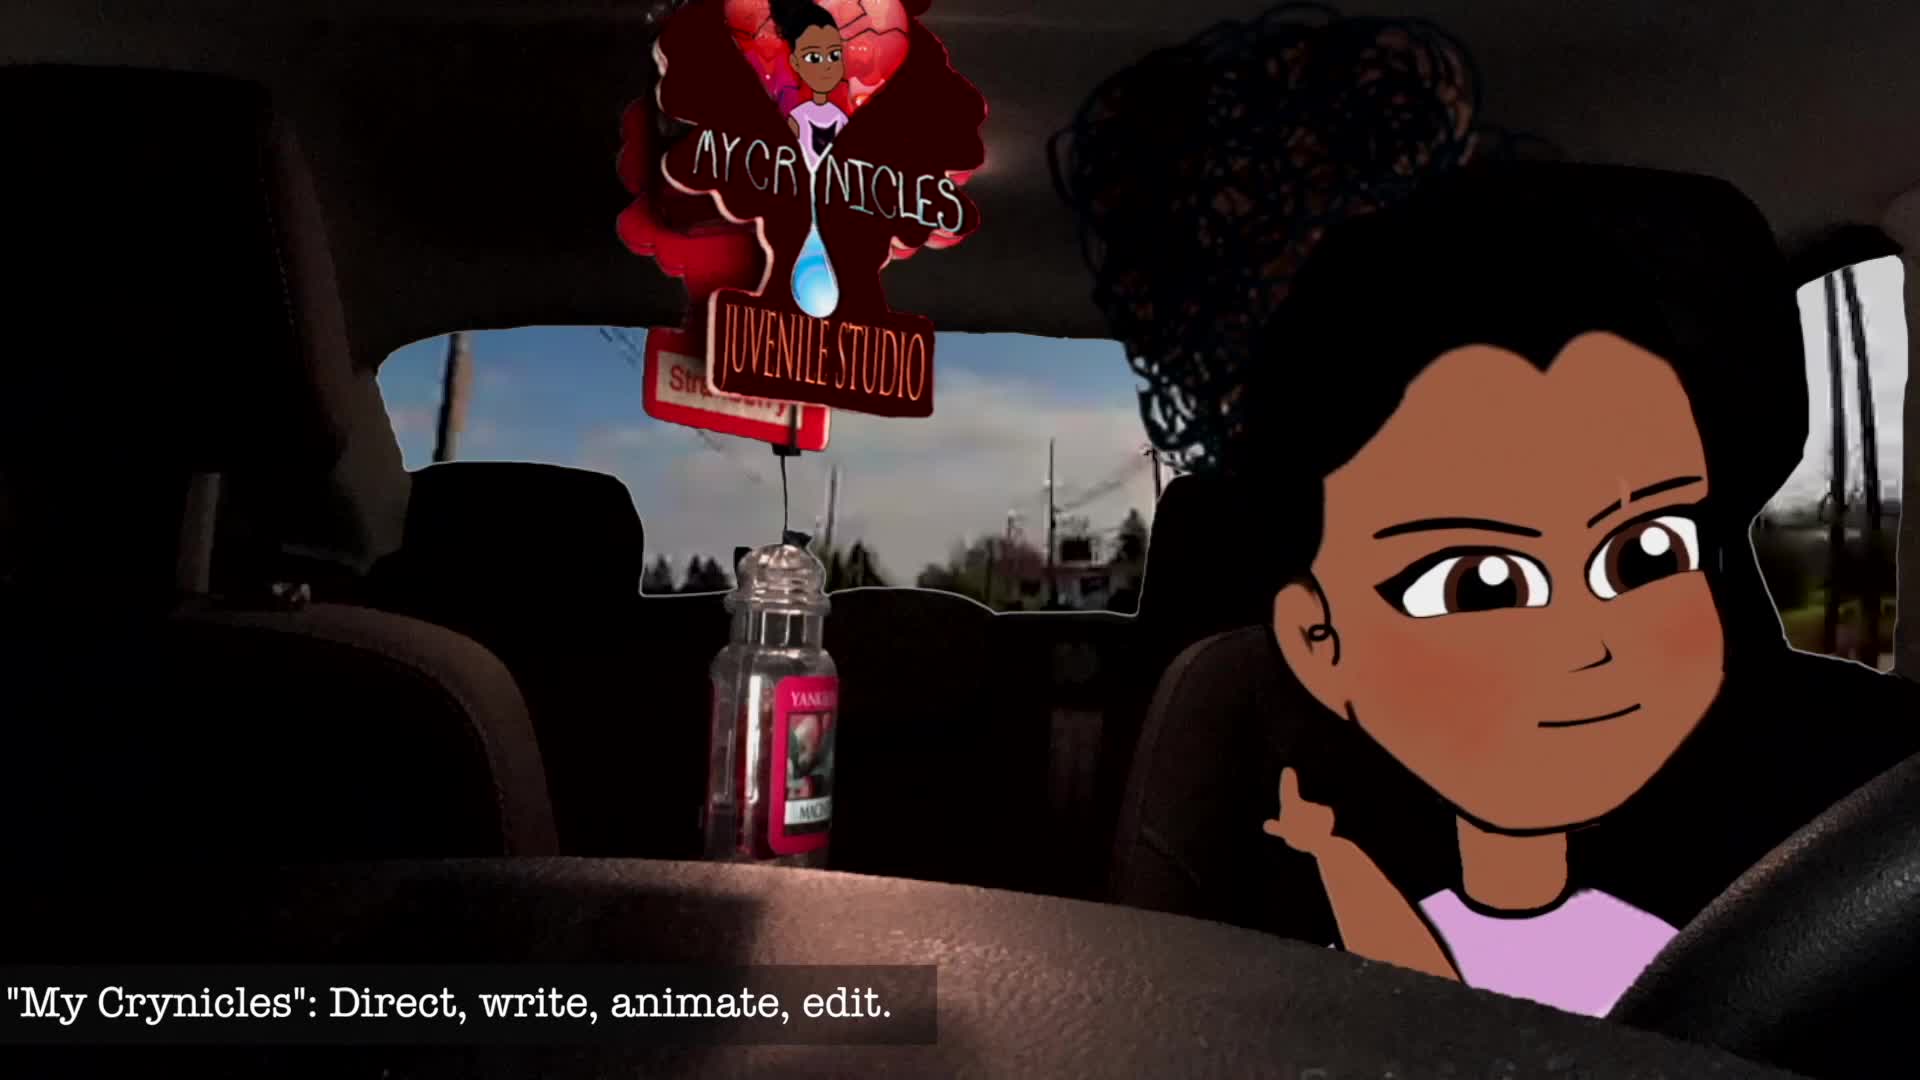 Internet Culture: Hilarious Animated Web-Series My Crynicles Is Saving Self-Isolation Boredom.[@MyCrynicles]